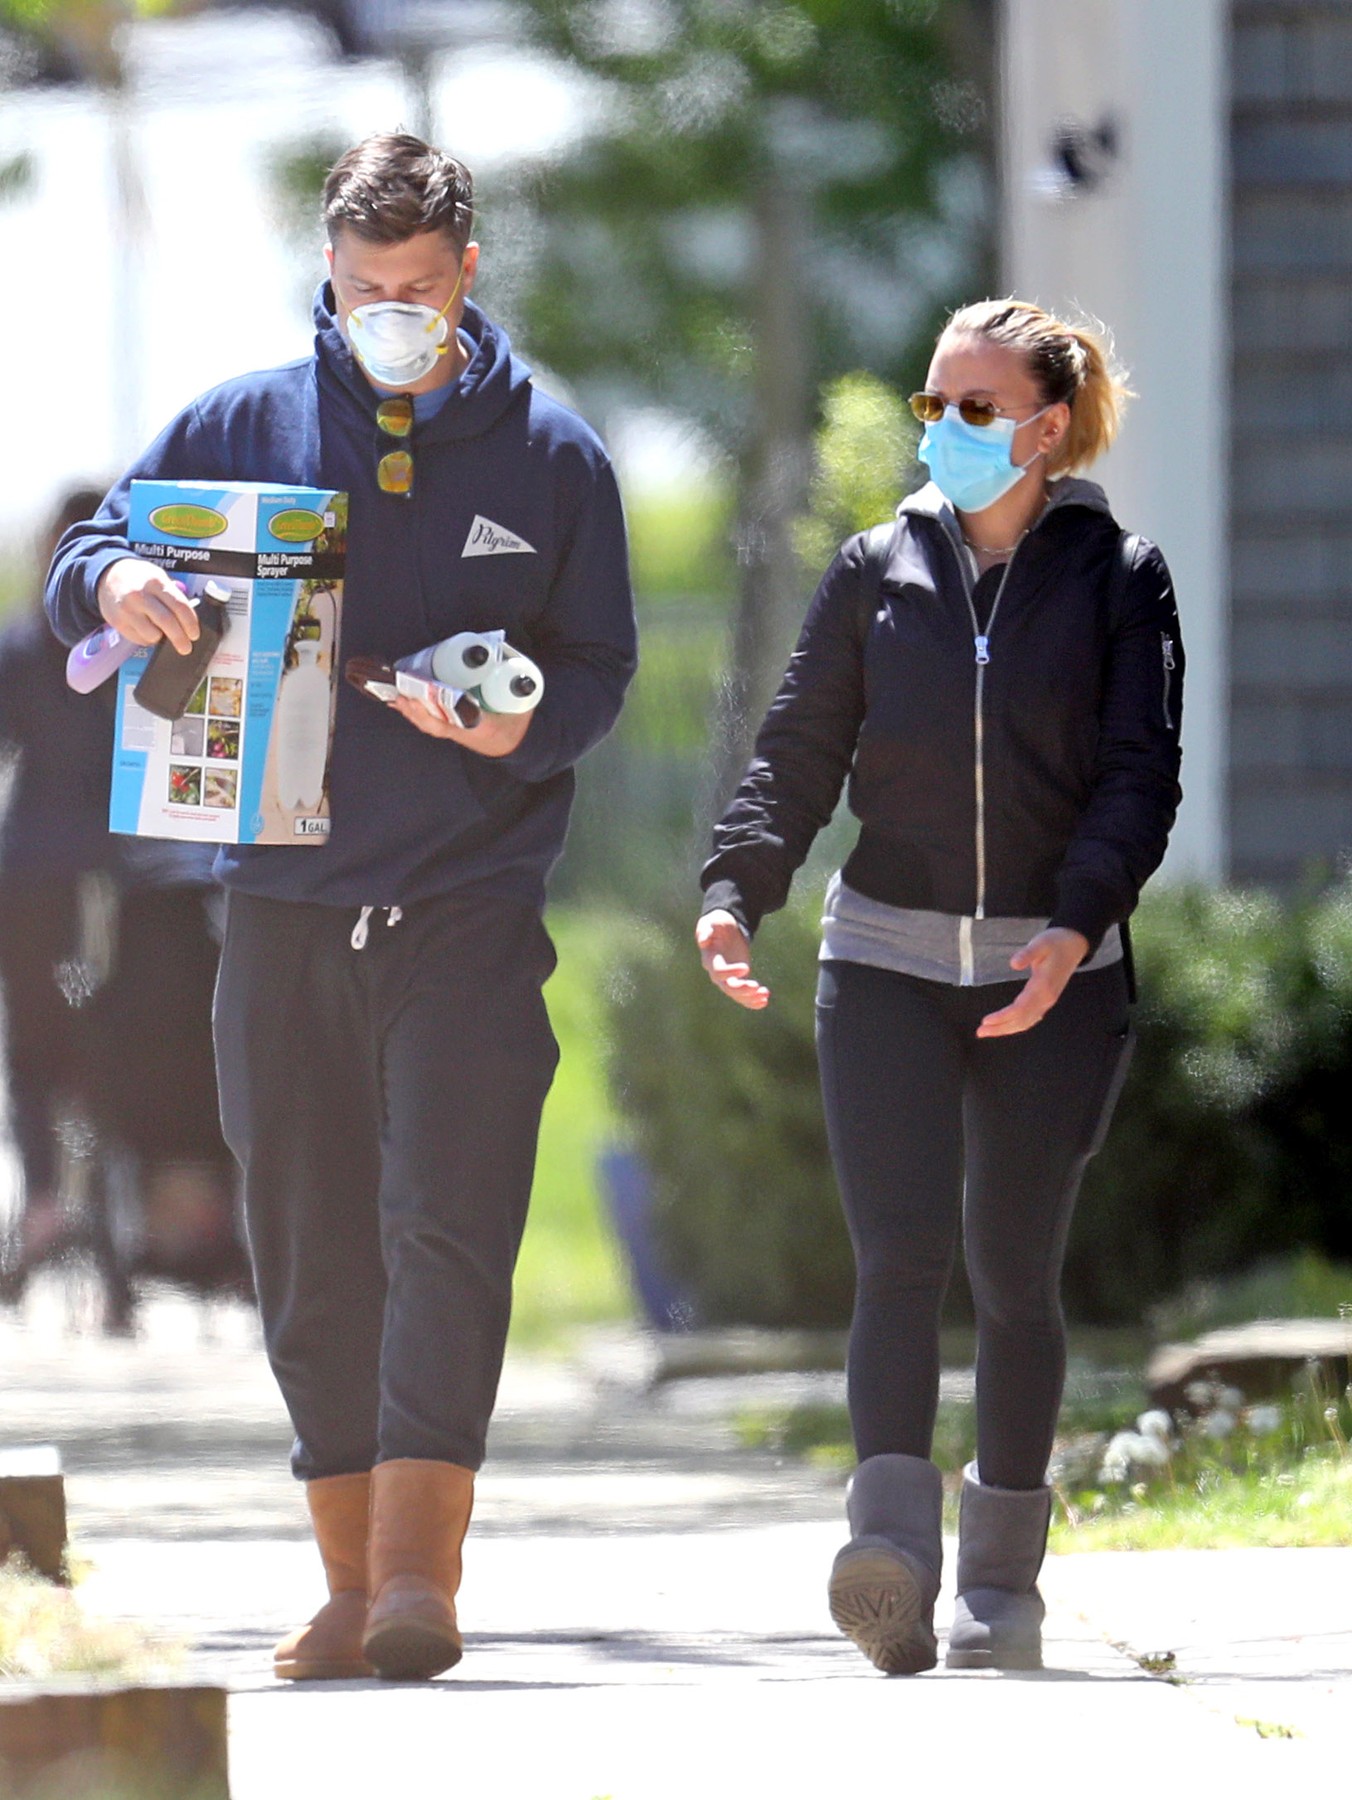 05/14/2020 EXCLUSIVE: Scarlett Johansson and Colin Jost are pictured running errands in The Hamptons, New York. The 35 year old actress wore a face mask, bomber jacket, black leggings, and grey Uggs. Jost, 37, also sported a face mask and Uggs paired with a sweatsuit., Image: 519360648, License: Rights-managed, Restrictions: Exclusive NO usage without agreed price and terms. Please contact sales@theimagedirect.com, Model Release: no, Credit line: TheImageDirect.com / The Image Direct / Profimedia